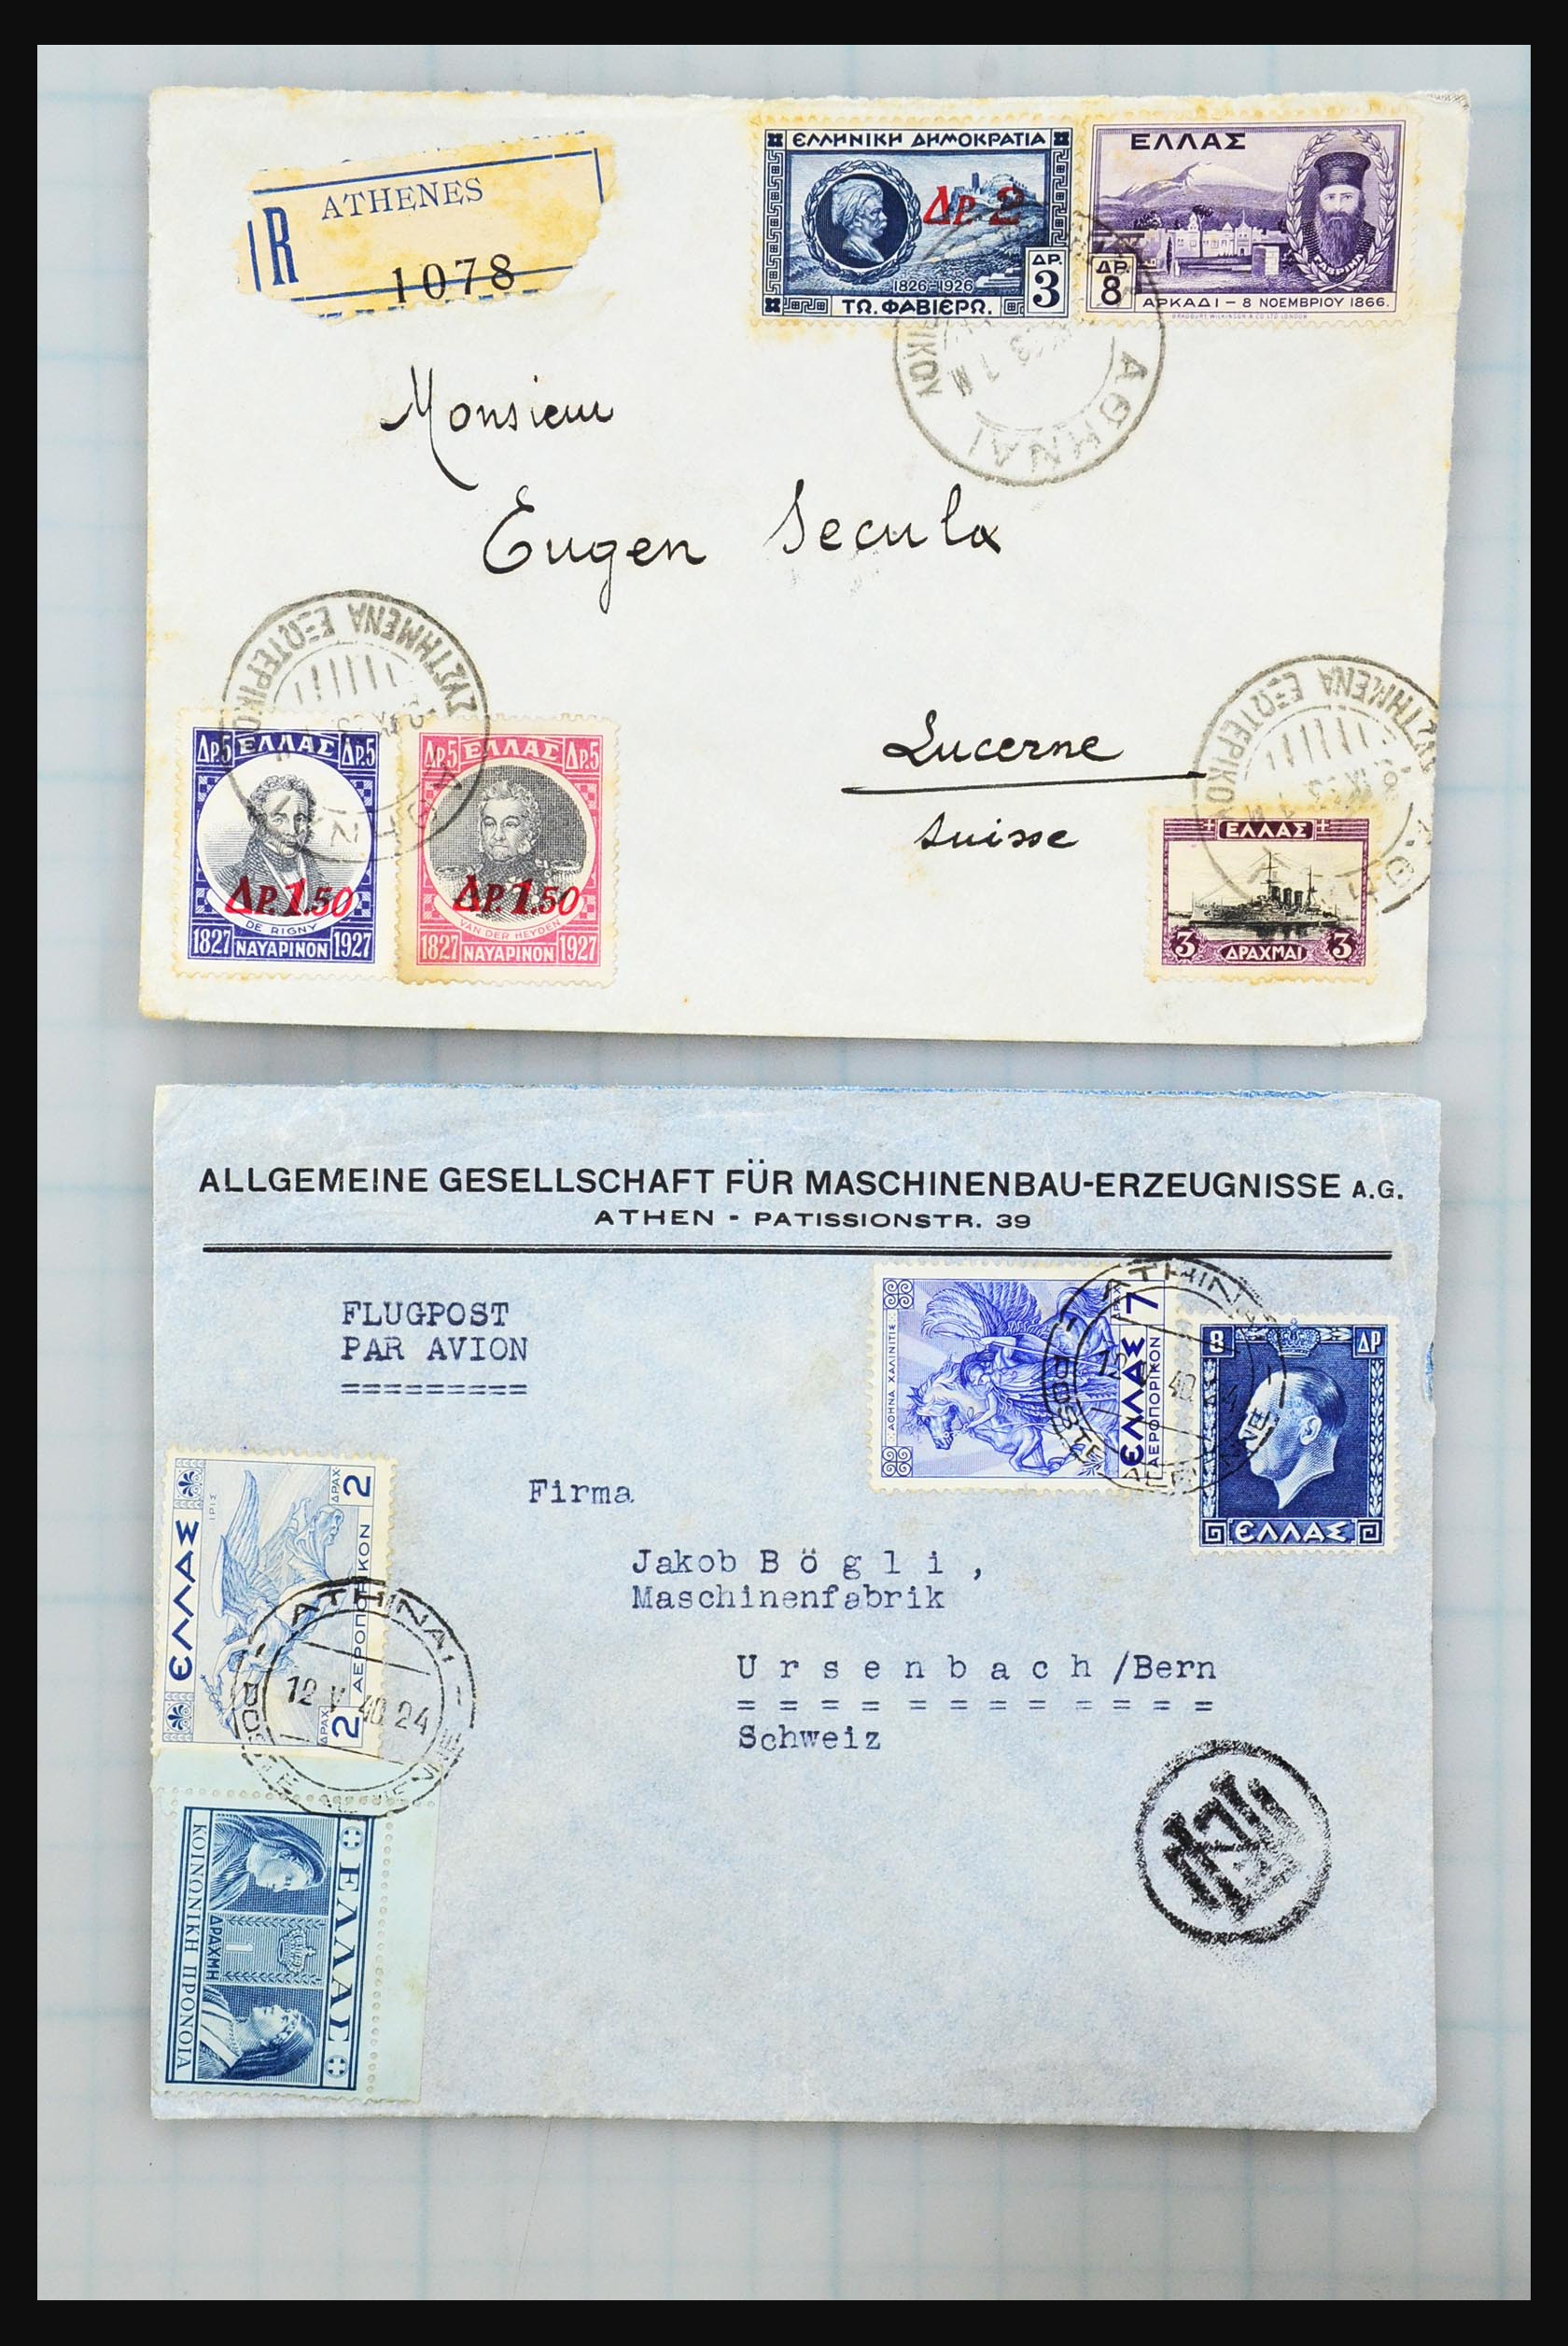 31358 018 - 31358 Portugal/Luxemburg/Greece covers 1880-1960.